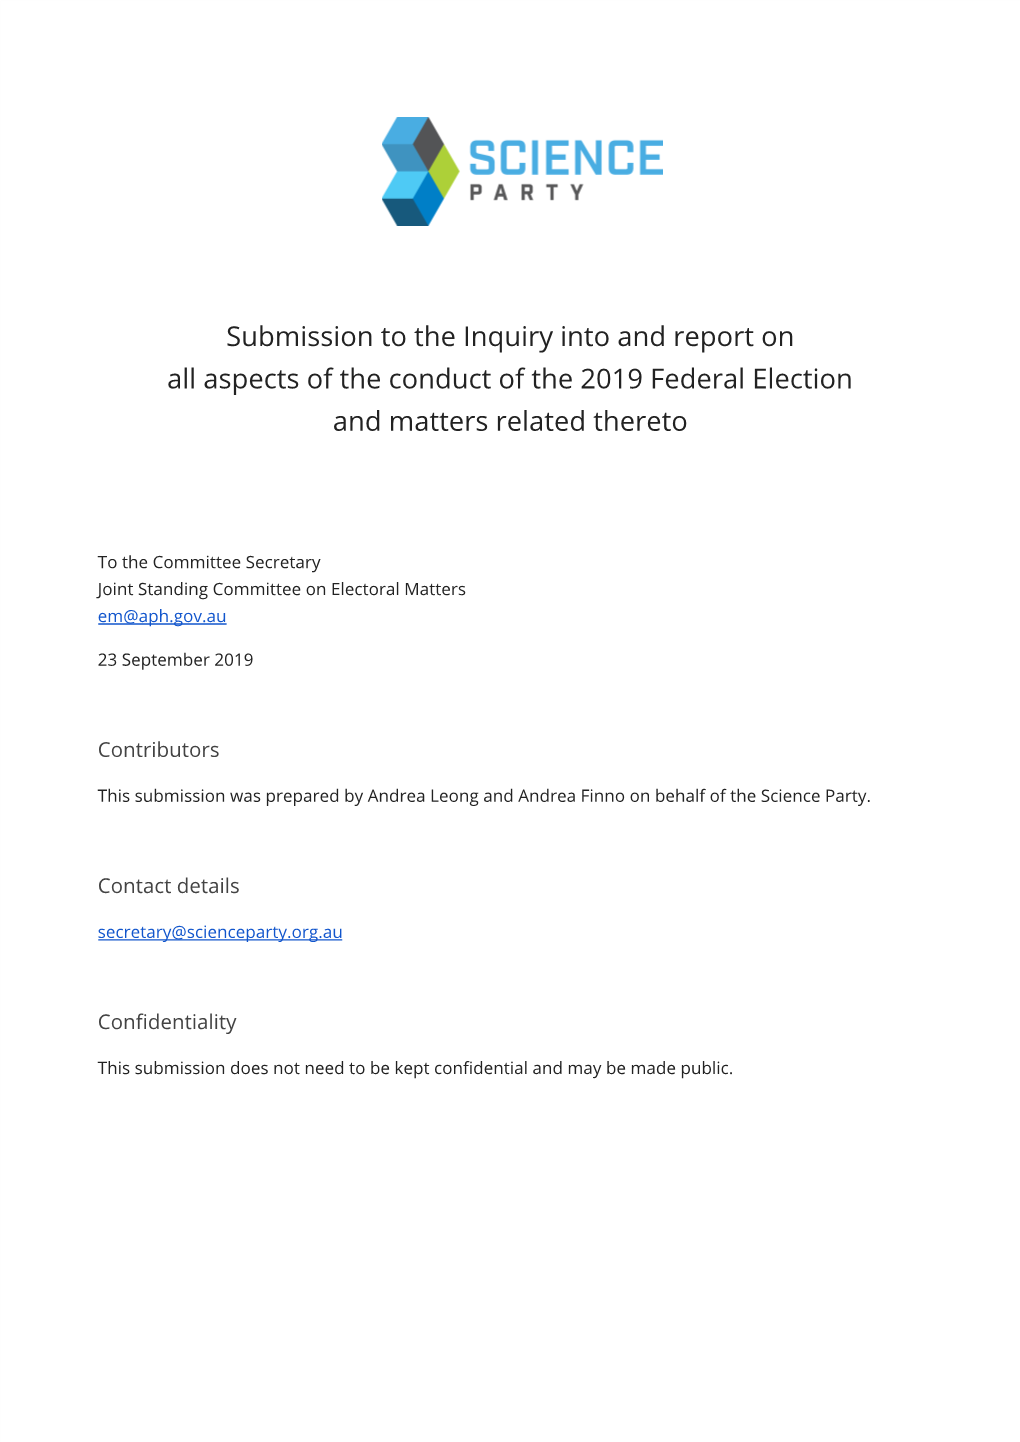 Submission to the Inquiry Into and Report on All Aspects of the Conduct of the 2019 Federal Election and Matters Related Thereto